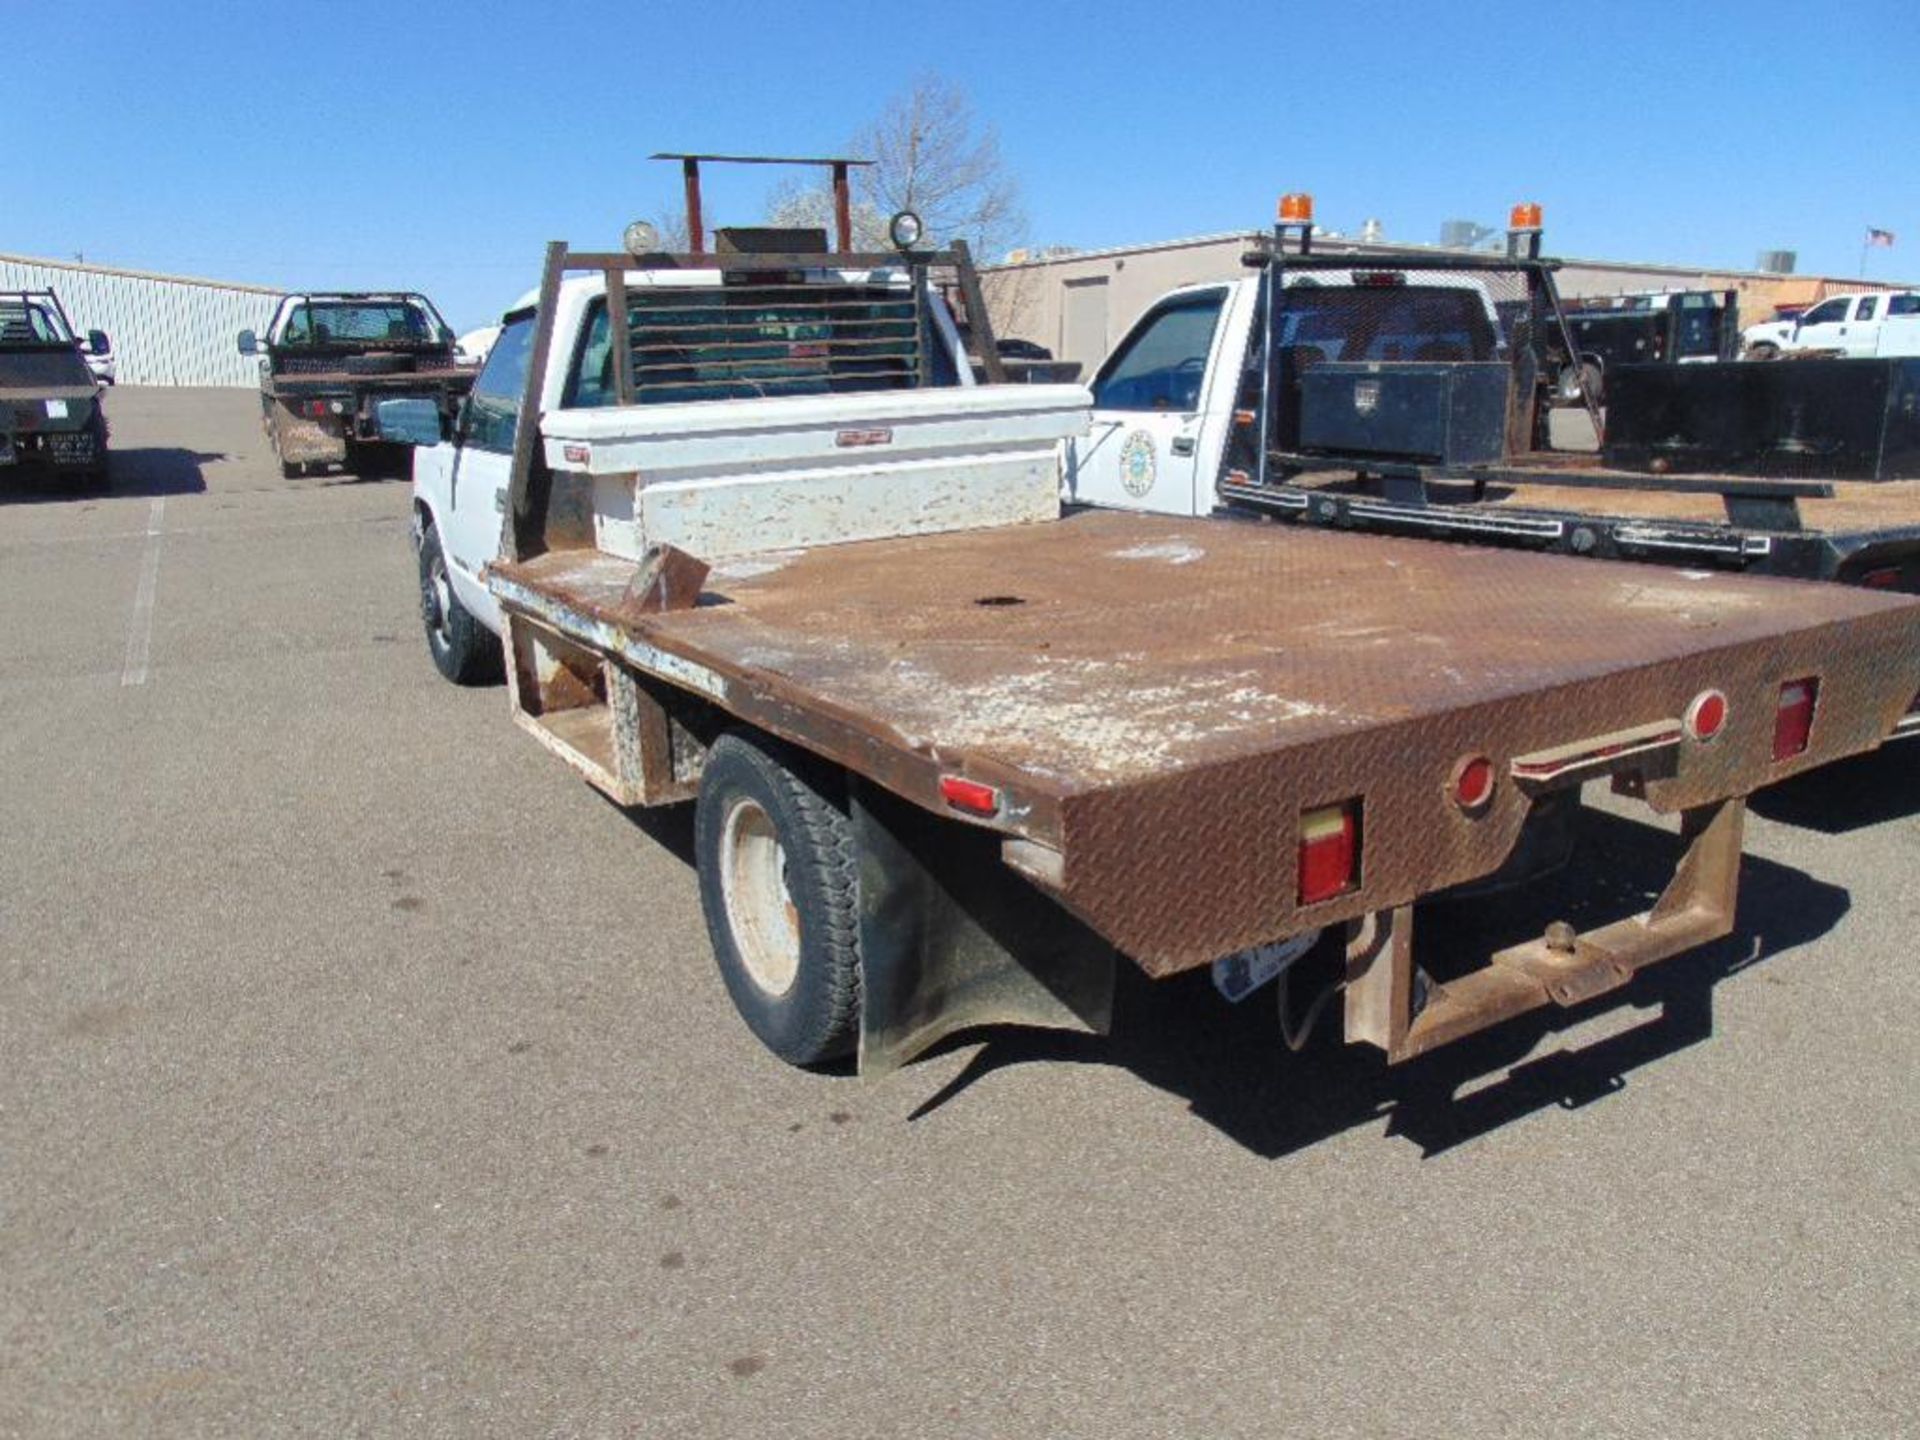 1997 Chevrolet 3500 Flatbed Truck s/n 1gbjc34j1vf018323, v8 eng, auto trans ,od reads 181092 miles - Image 2 of 6